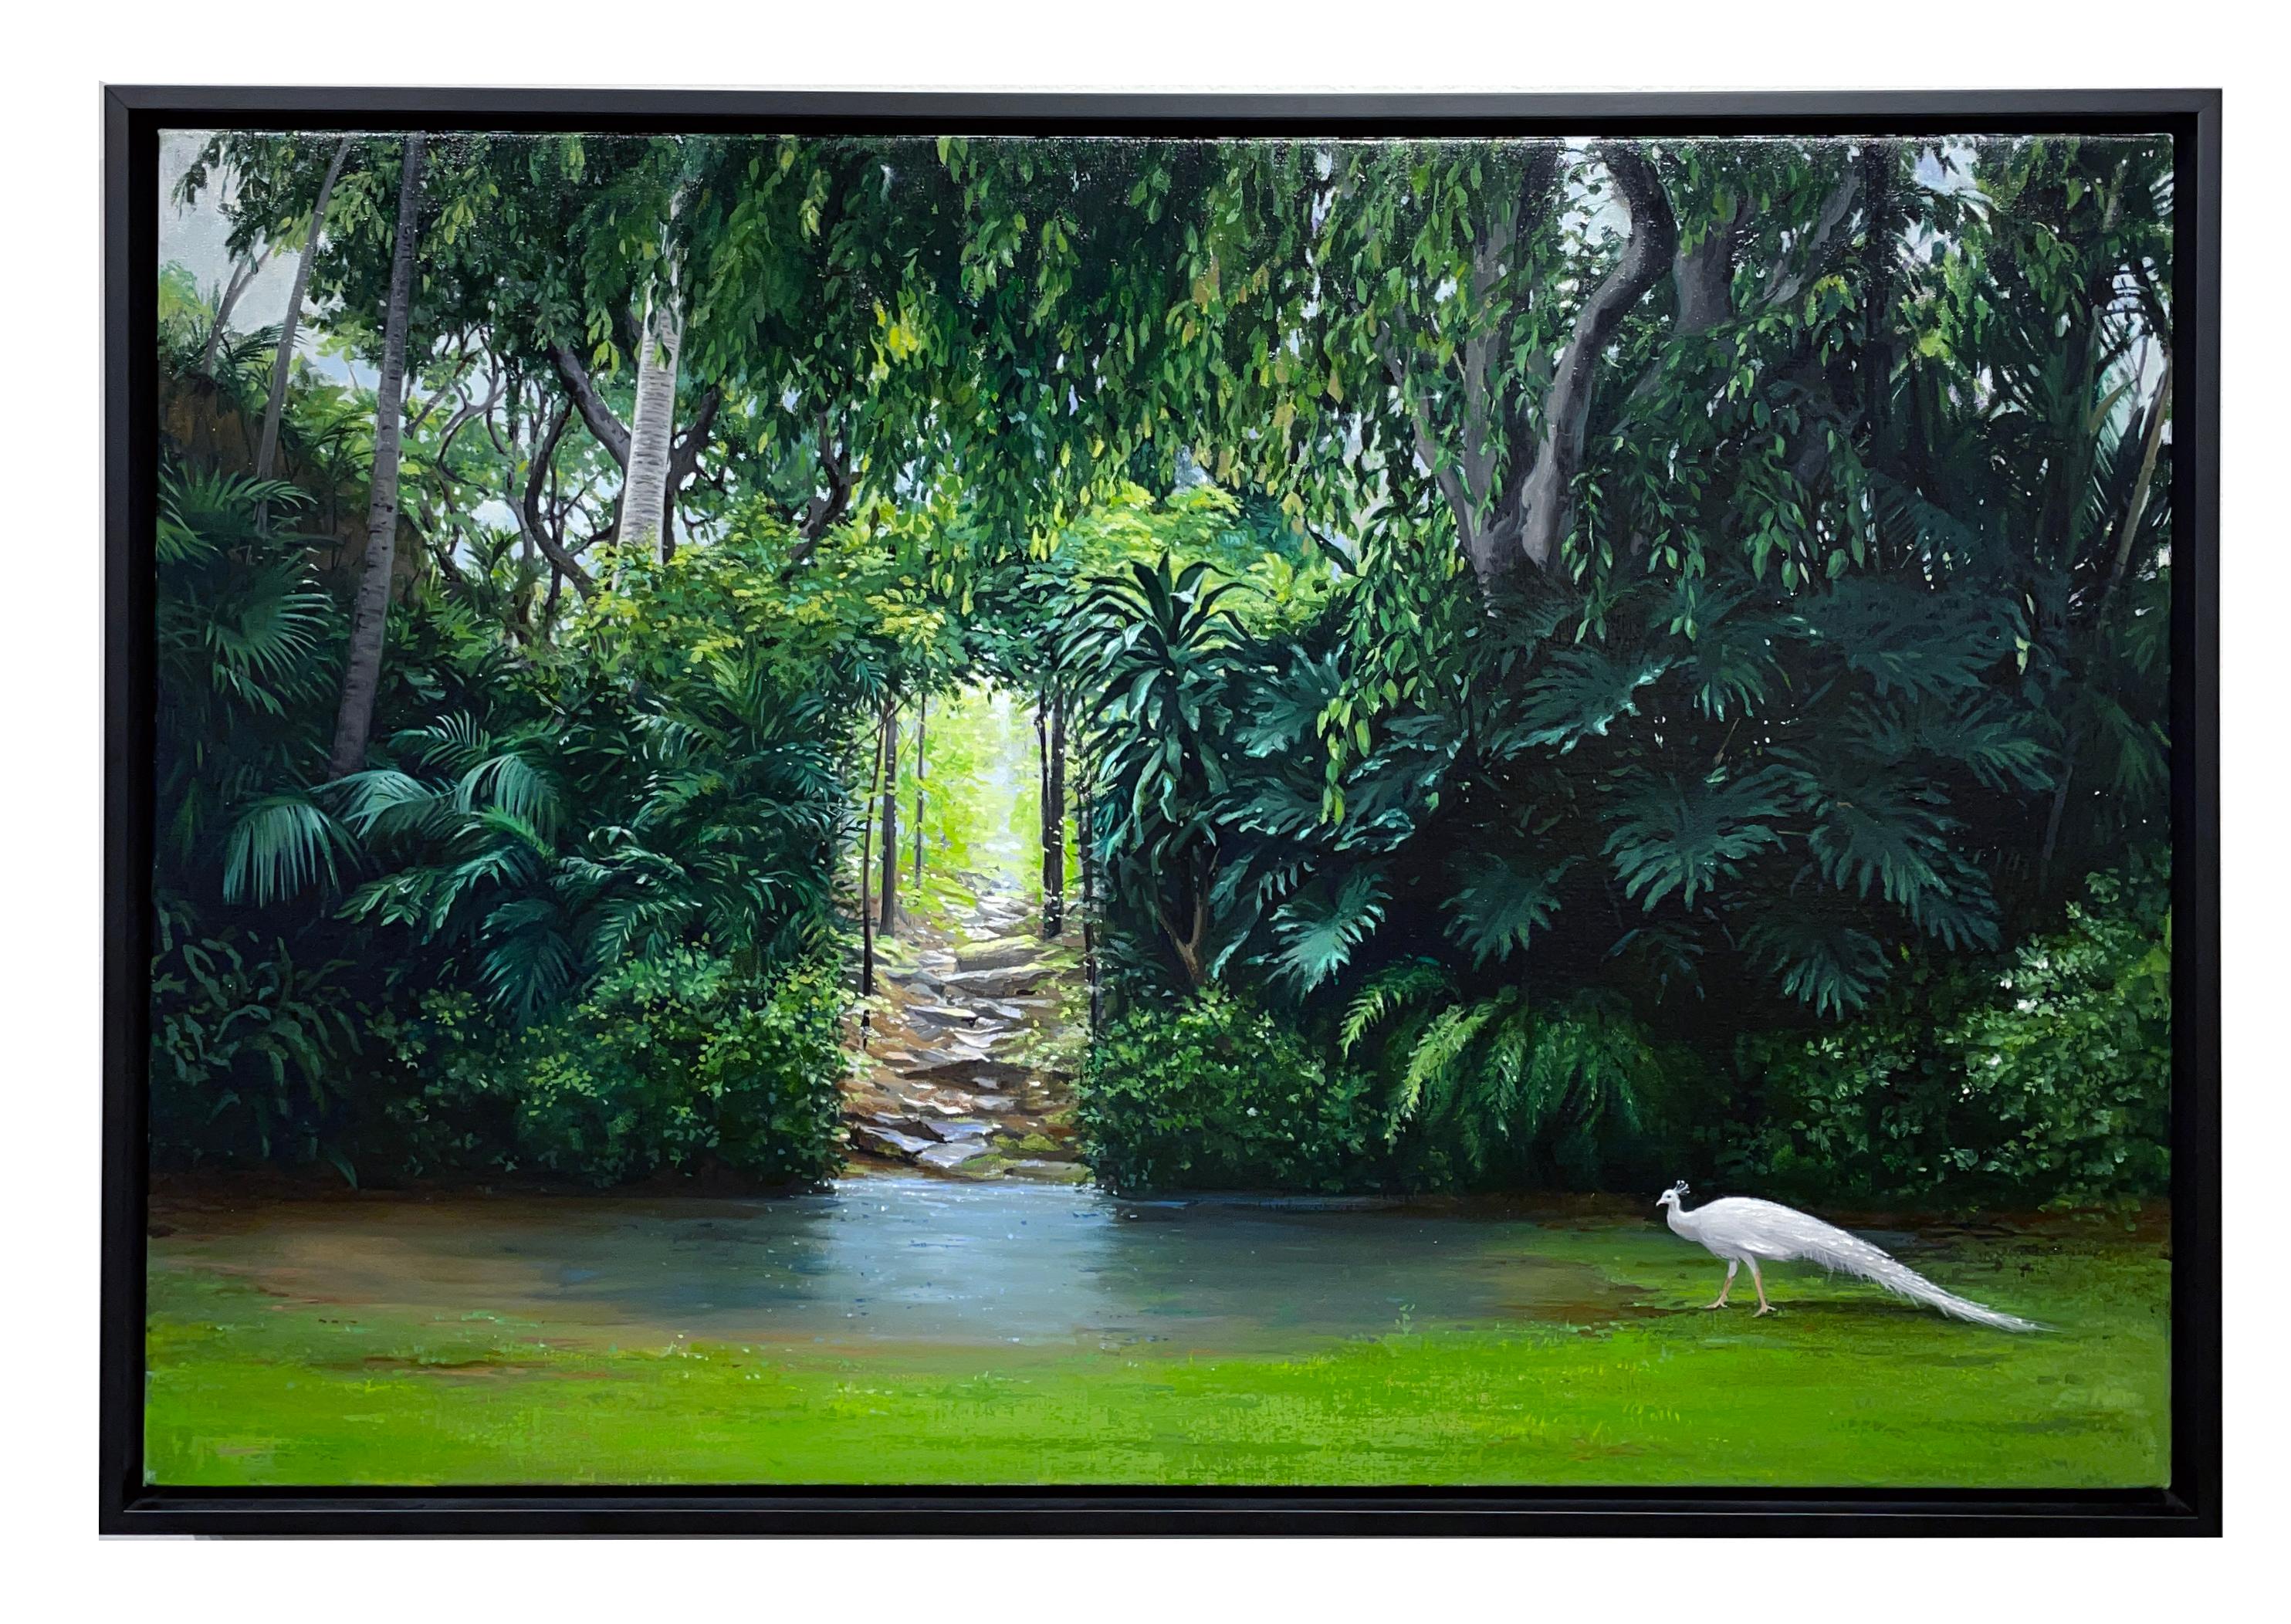 Echo, Lush Tropical Scene with Pond and Peacock, Original Oil on Linen, Framed - Painting by Carol Pylant